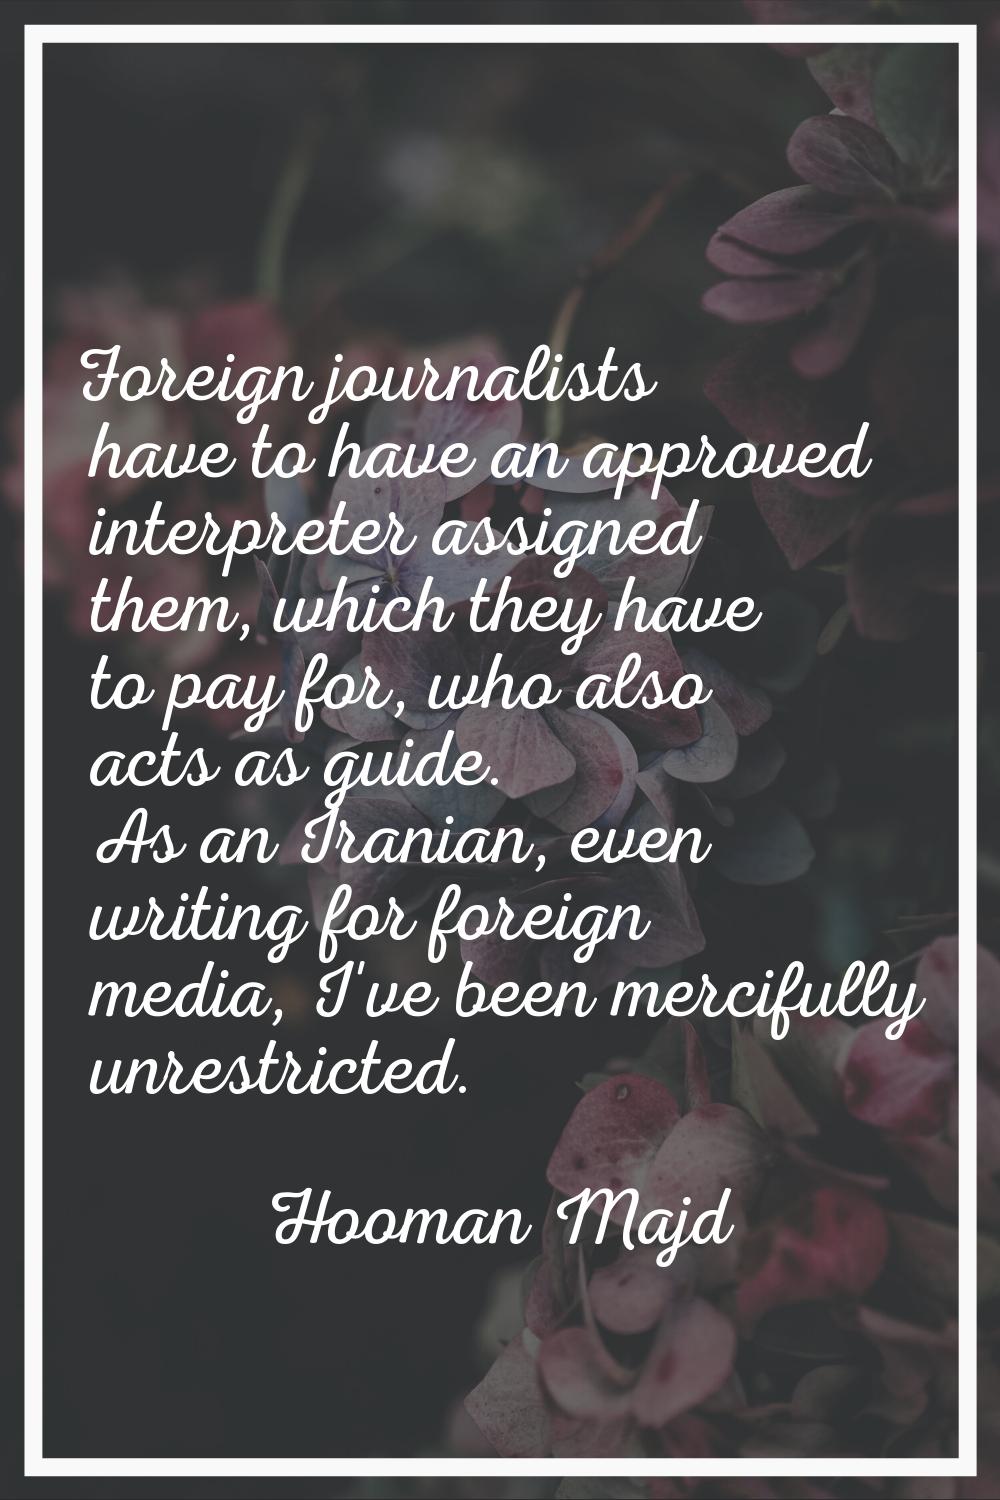 Foreign journalists have to have an approved interpreter assigned them, which they have to pay for,